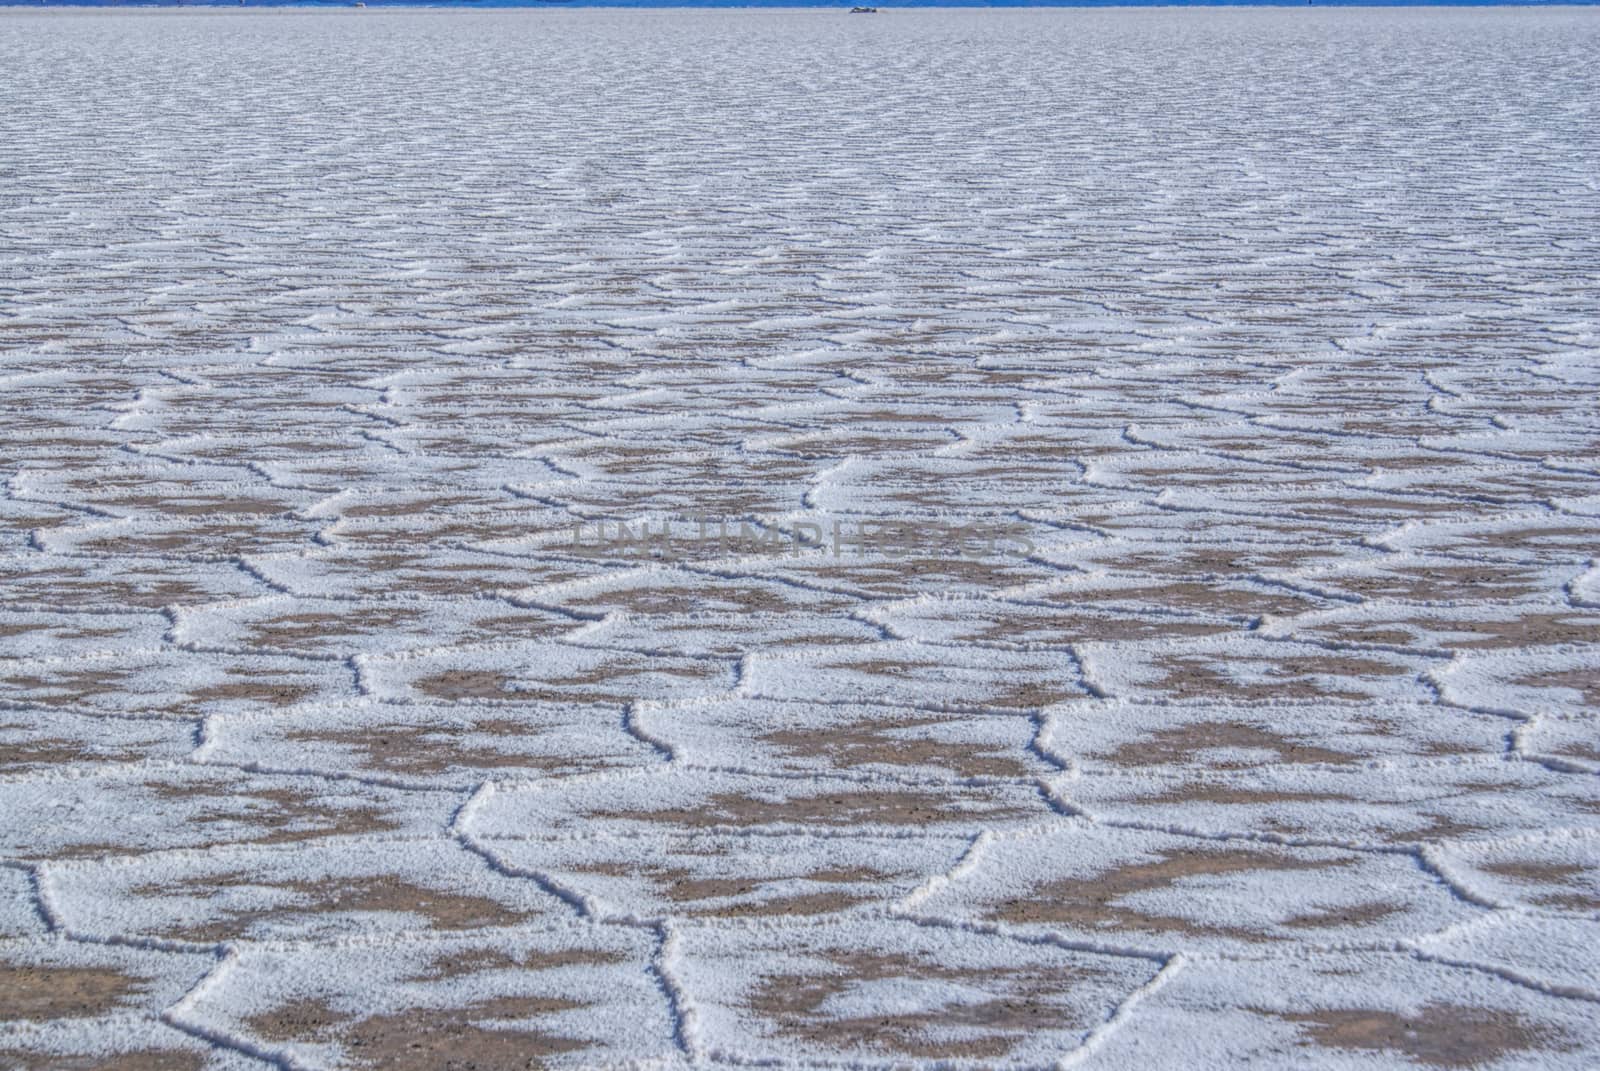 Unusual shapes on the surface of salt planes Salina Grandes in Argentina